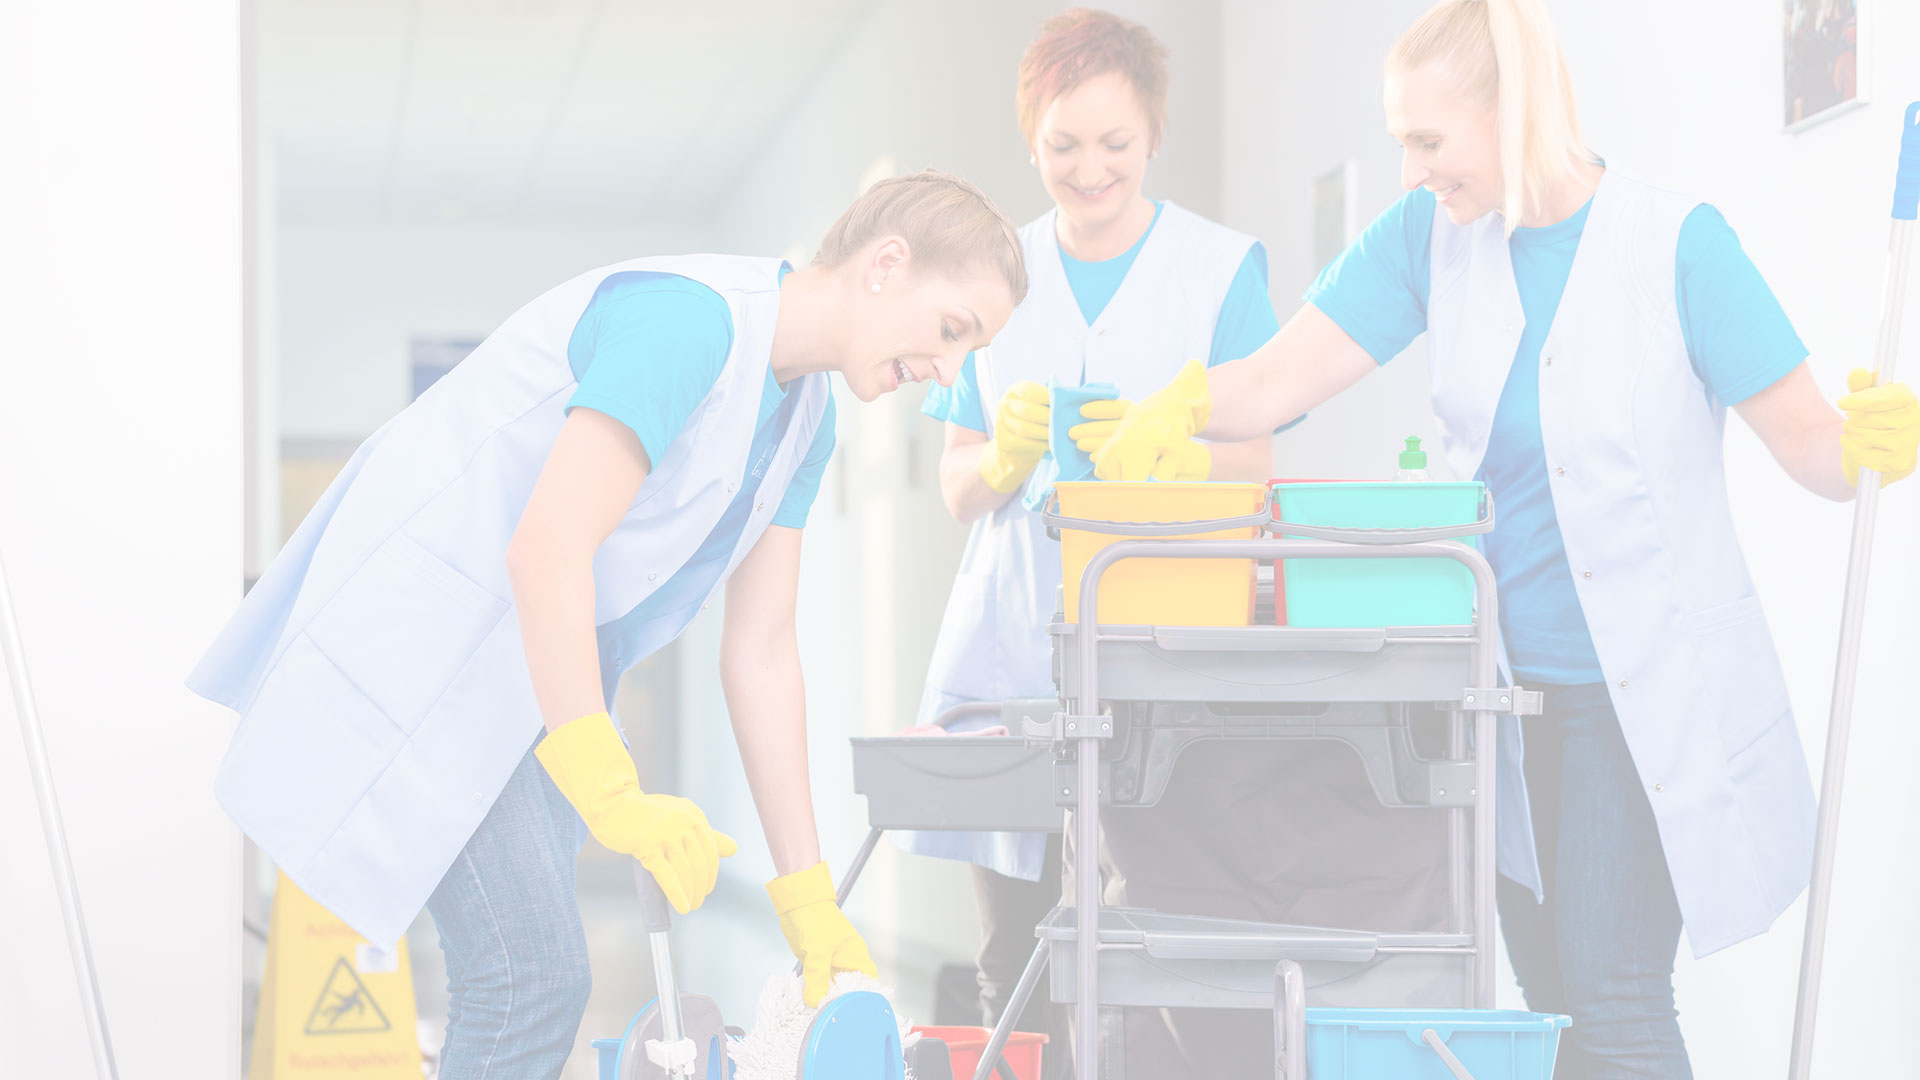 Cleaning Services, Janitorial Services and Commercial Cleaning Services